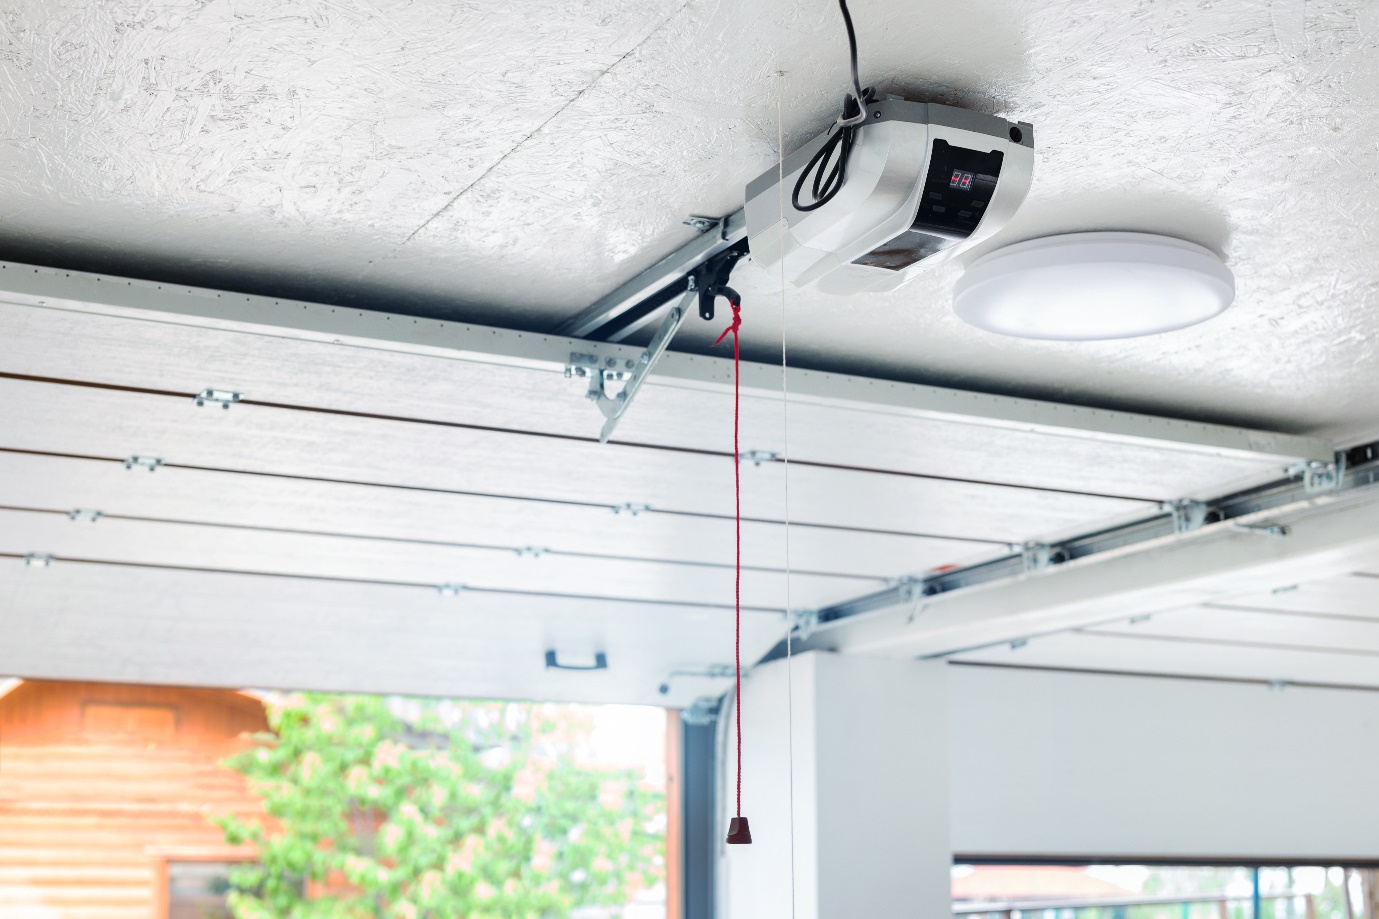 automatic garage door opener electric engine gear mounted on ceiling with emergency cord